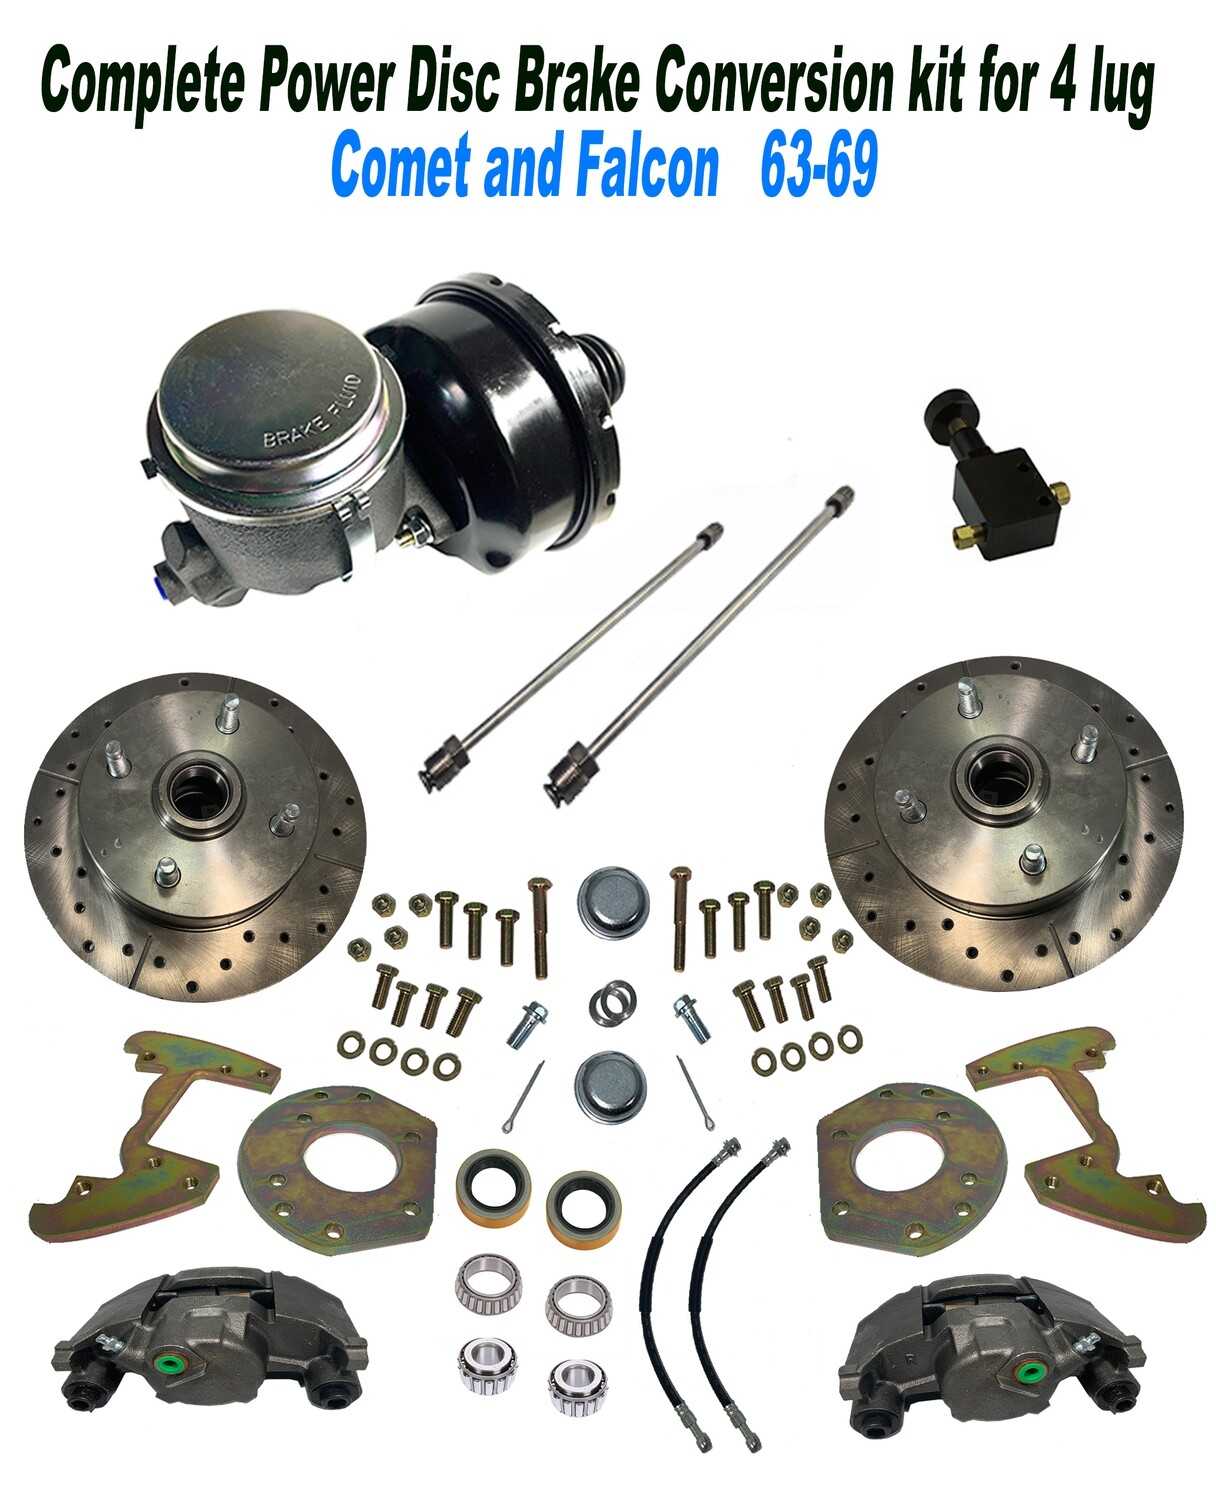 1963-67, Ford Falcon/ Comet. Mustang(64-66) 6 cylinder Front Power disc brake kit, 4 lug for 14